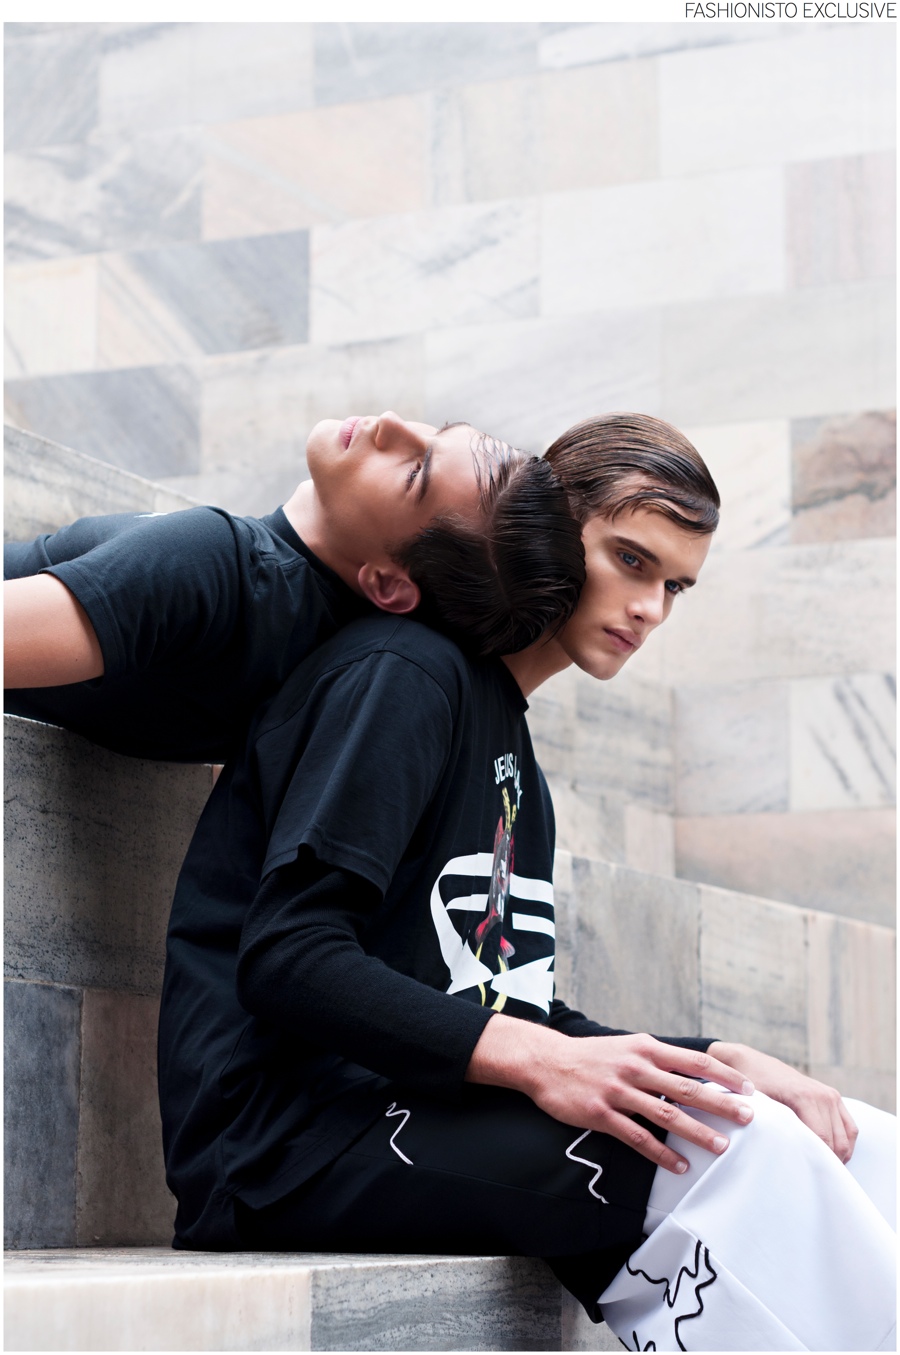 Left to Right:  Stanislaw wears t-shirt Riccardo Tisci for NIKE. Riccardo wears shirt Givenchy by Riccardo Tisci and pants Johnny Valter Vi.